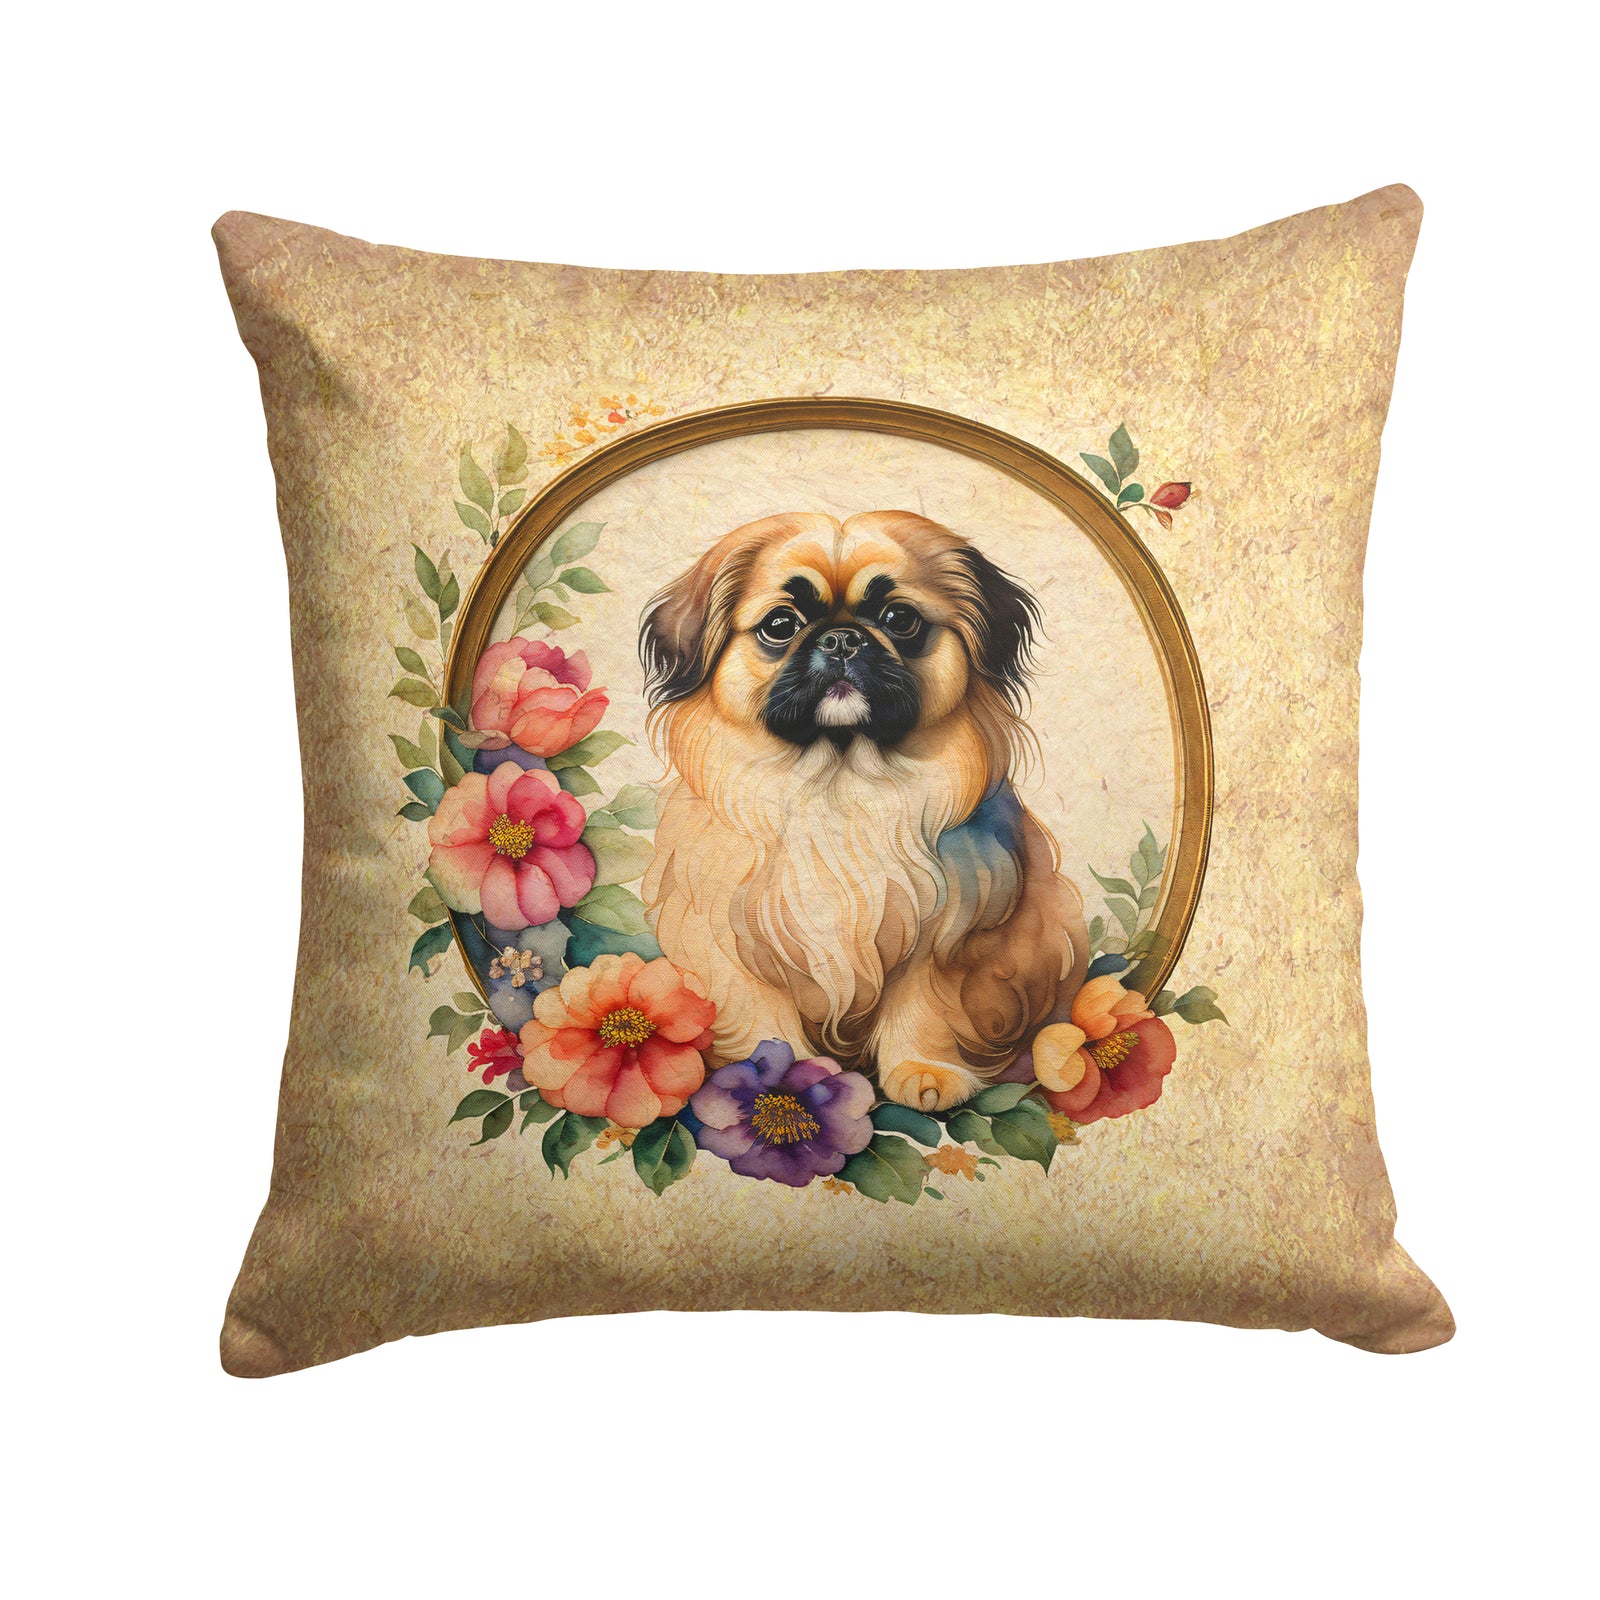 Buy this Pekingese and Flowers Fabric Decorative Pillow